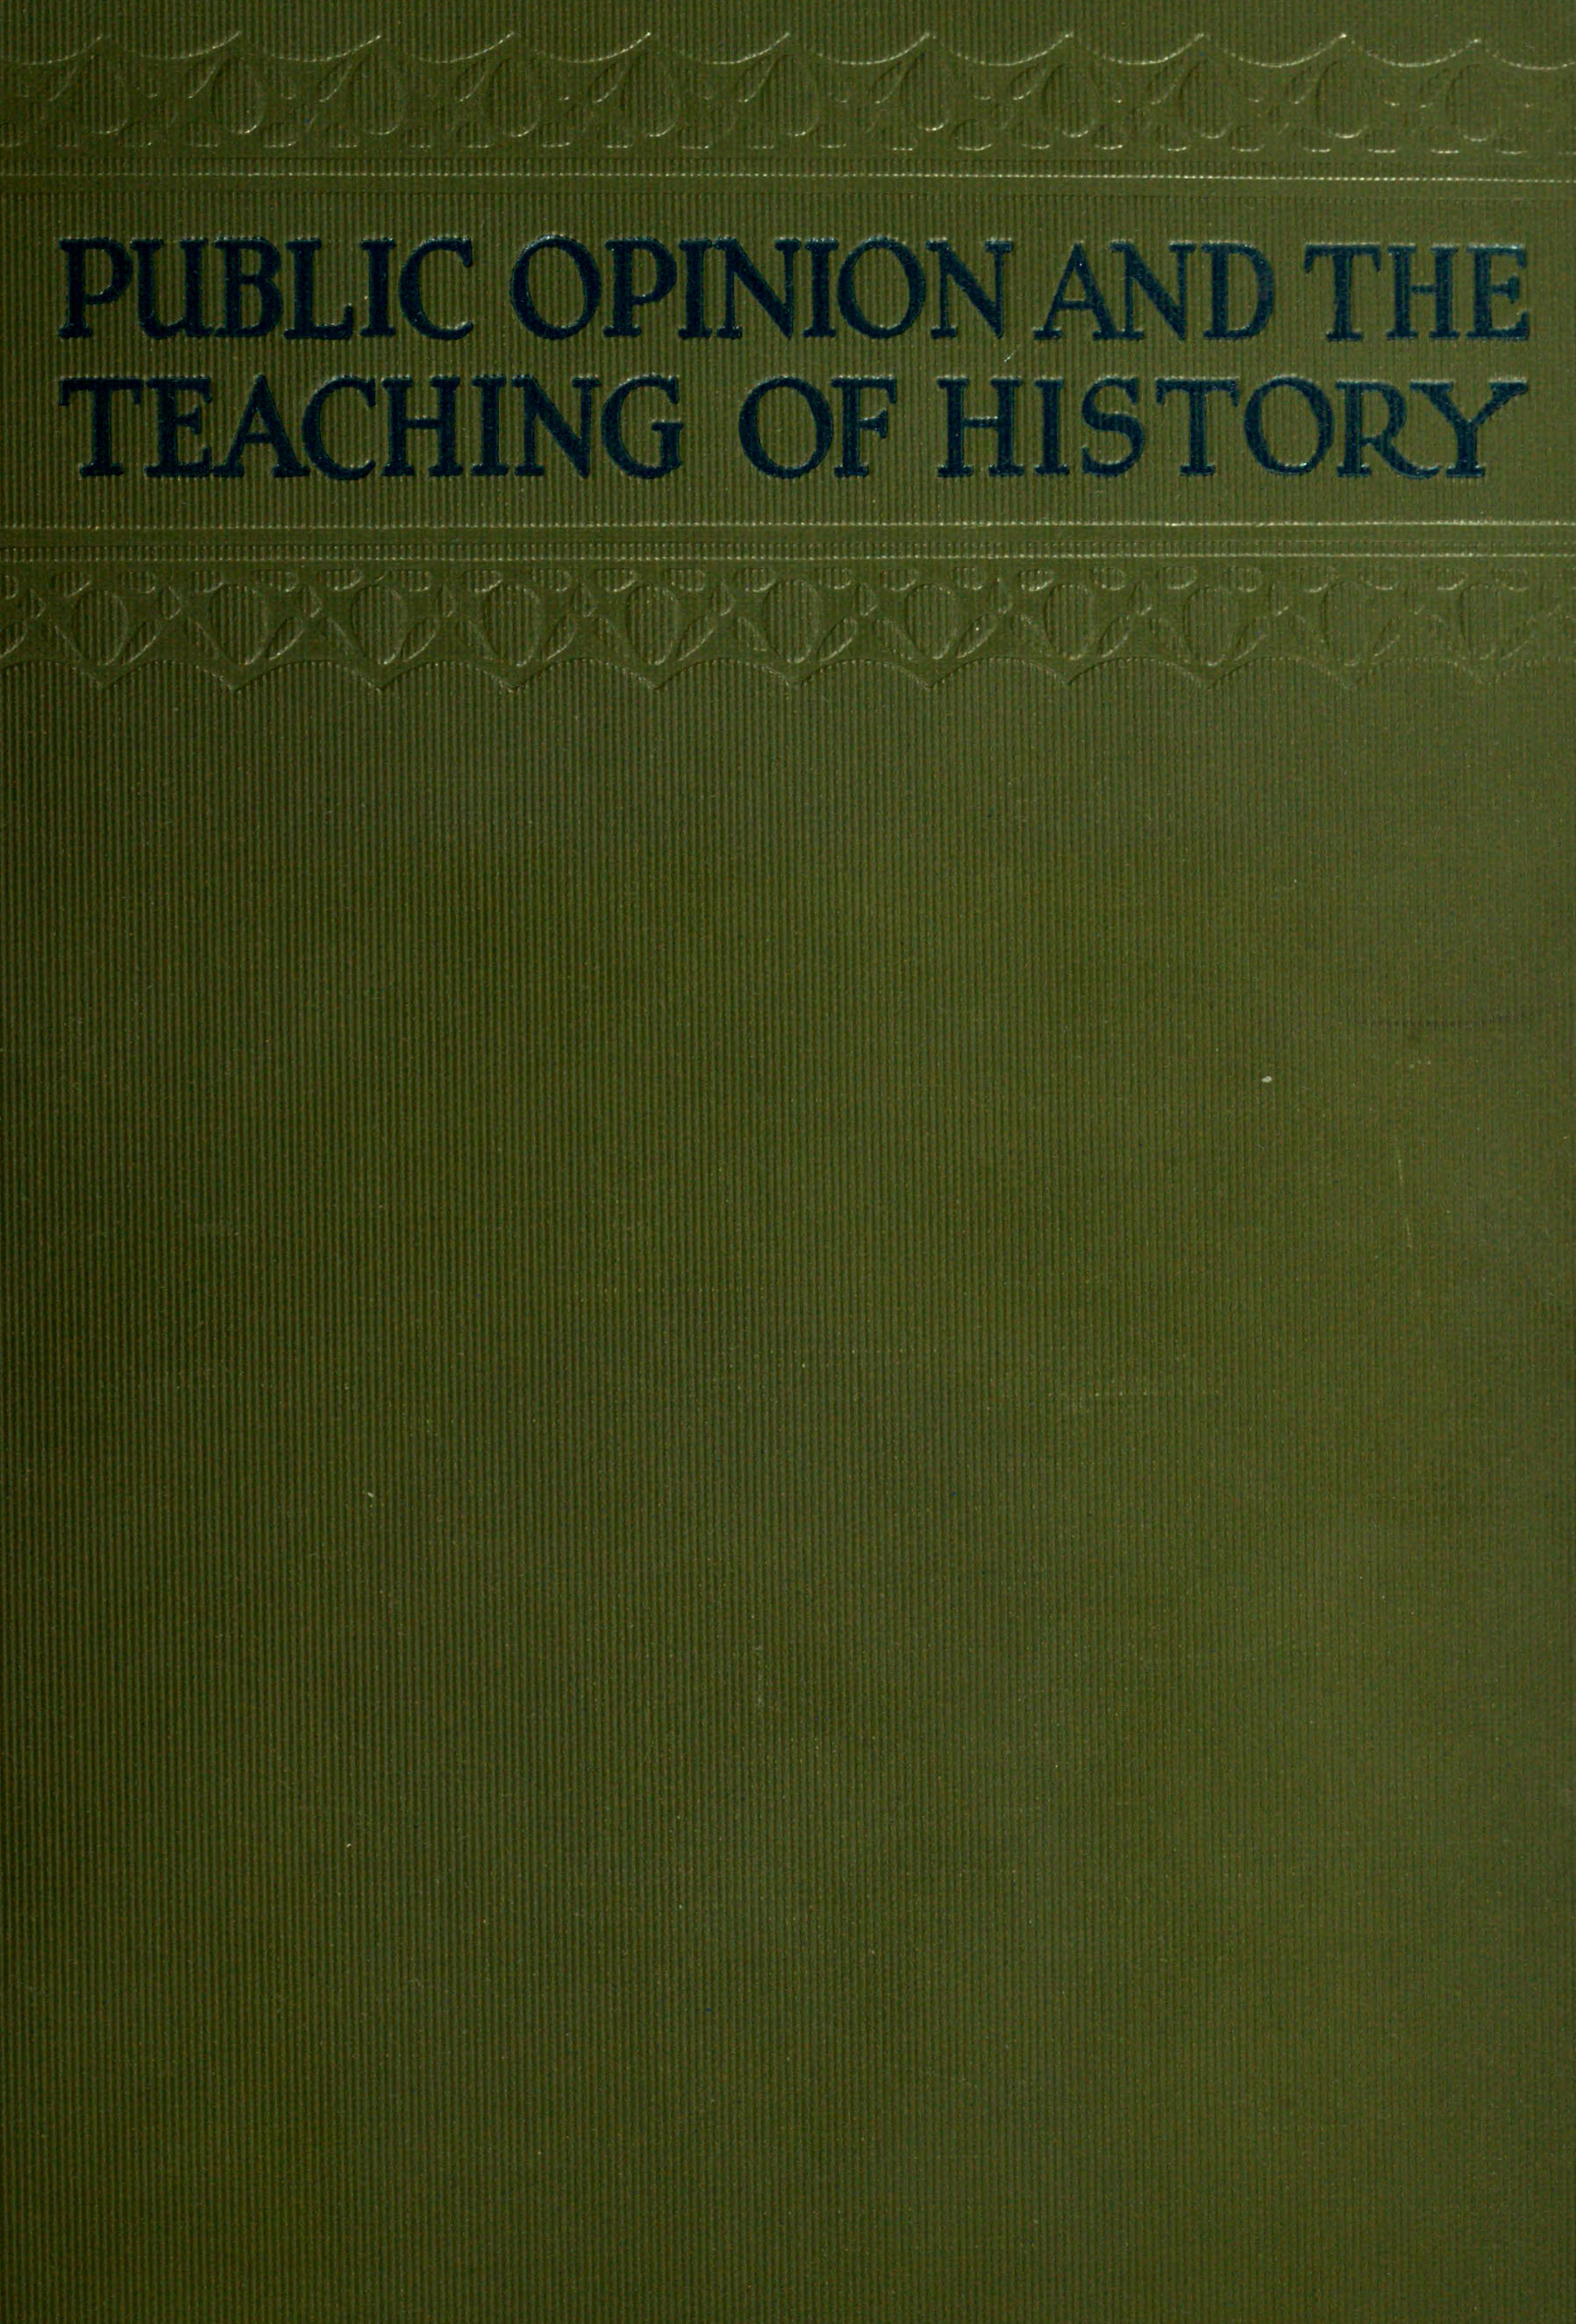 Public opinion and the teaching of history in the United States